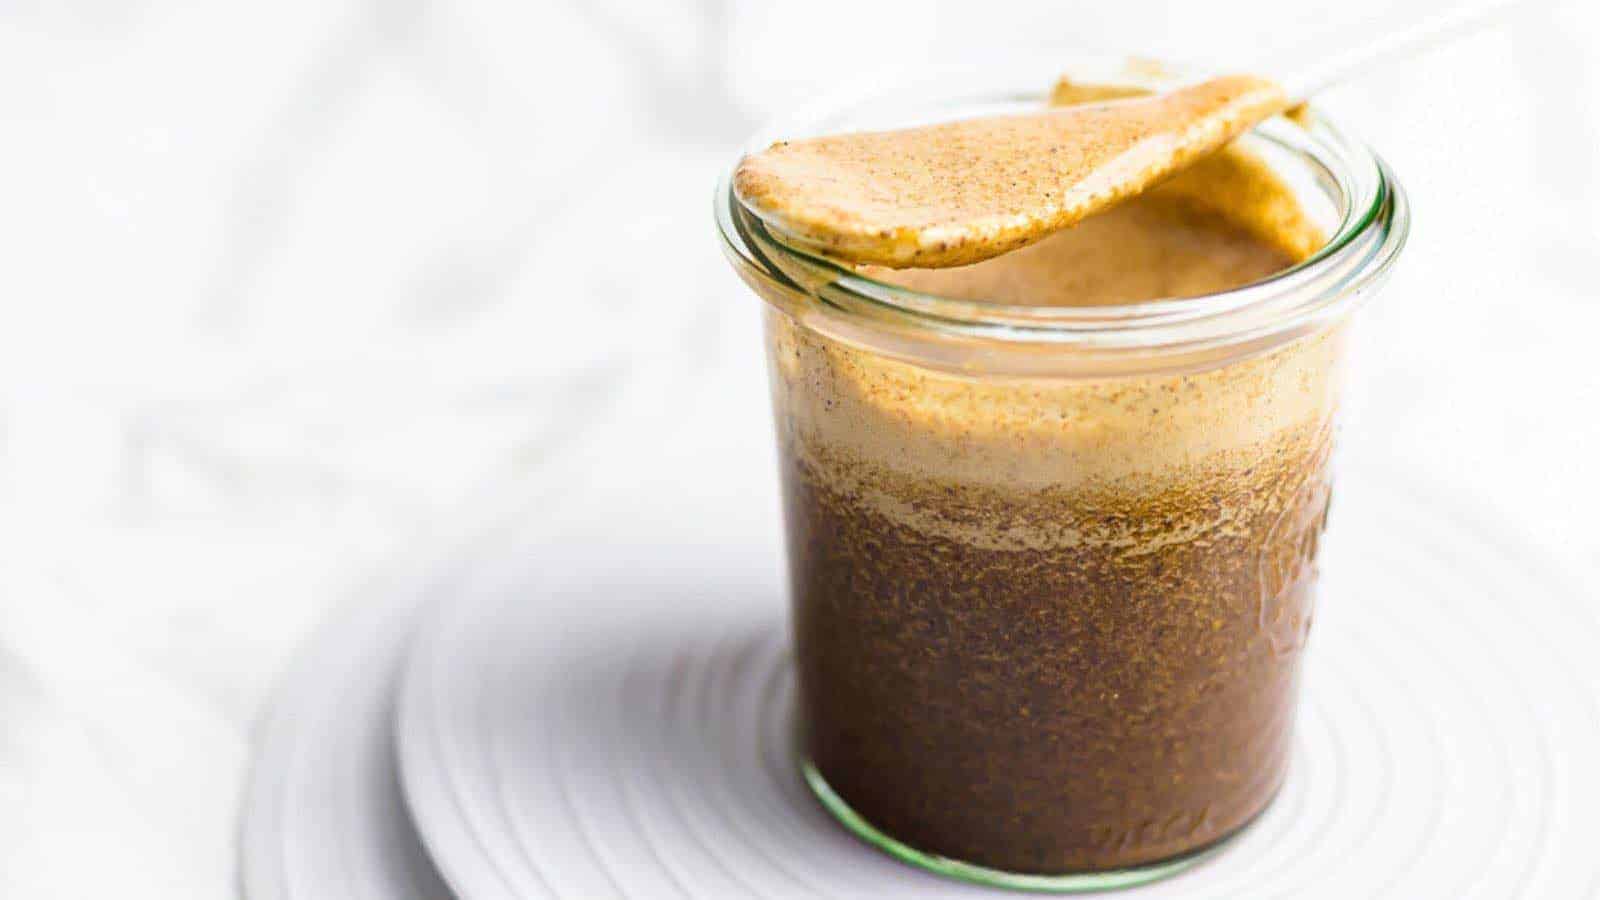 A jar of Worcestershire Sauce on a plate with a spoon.